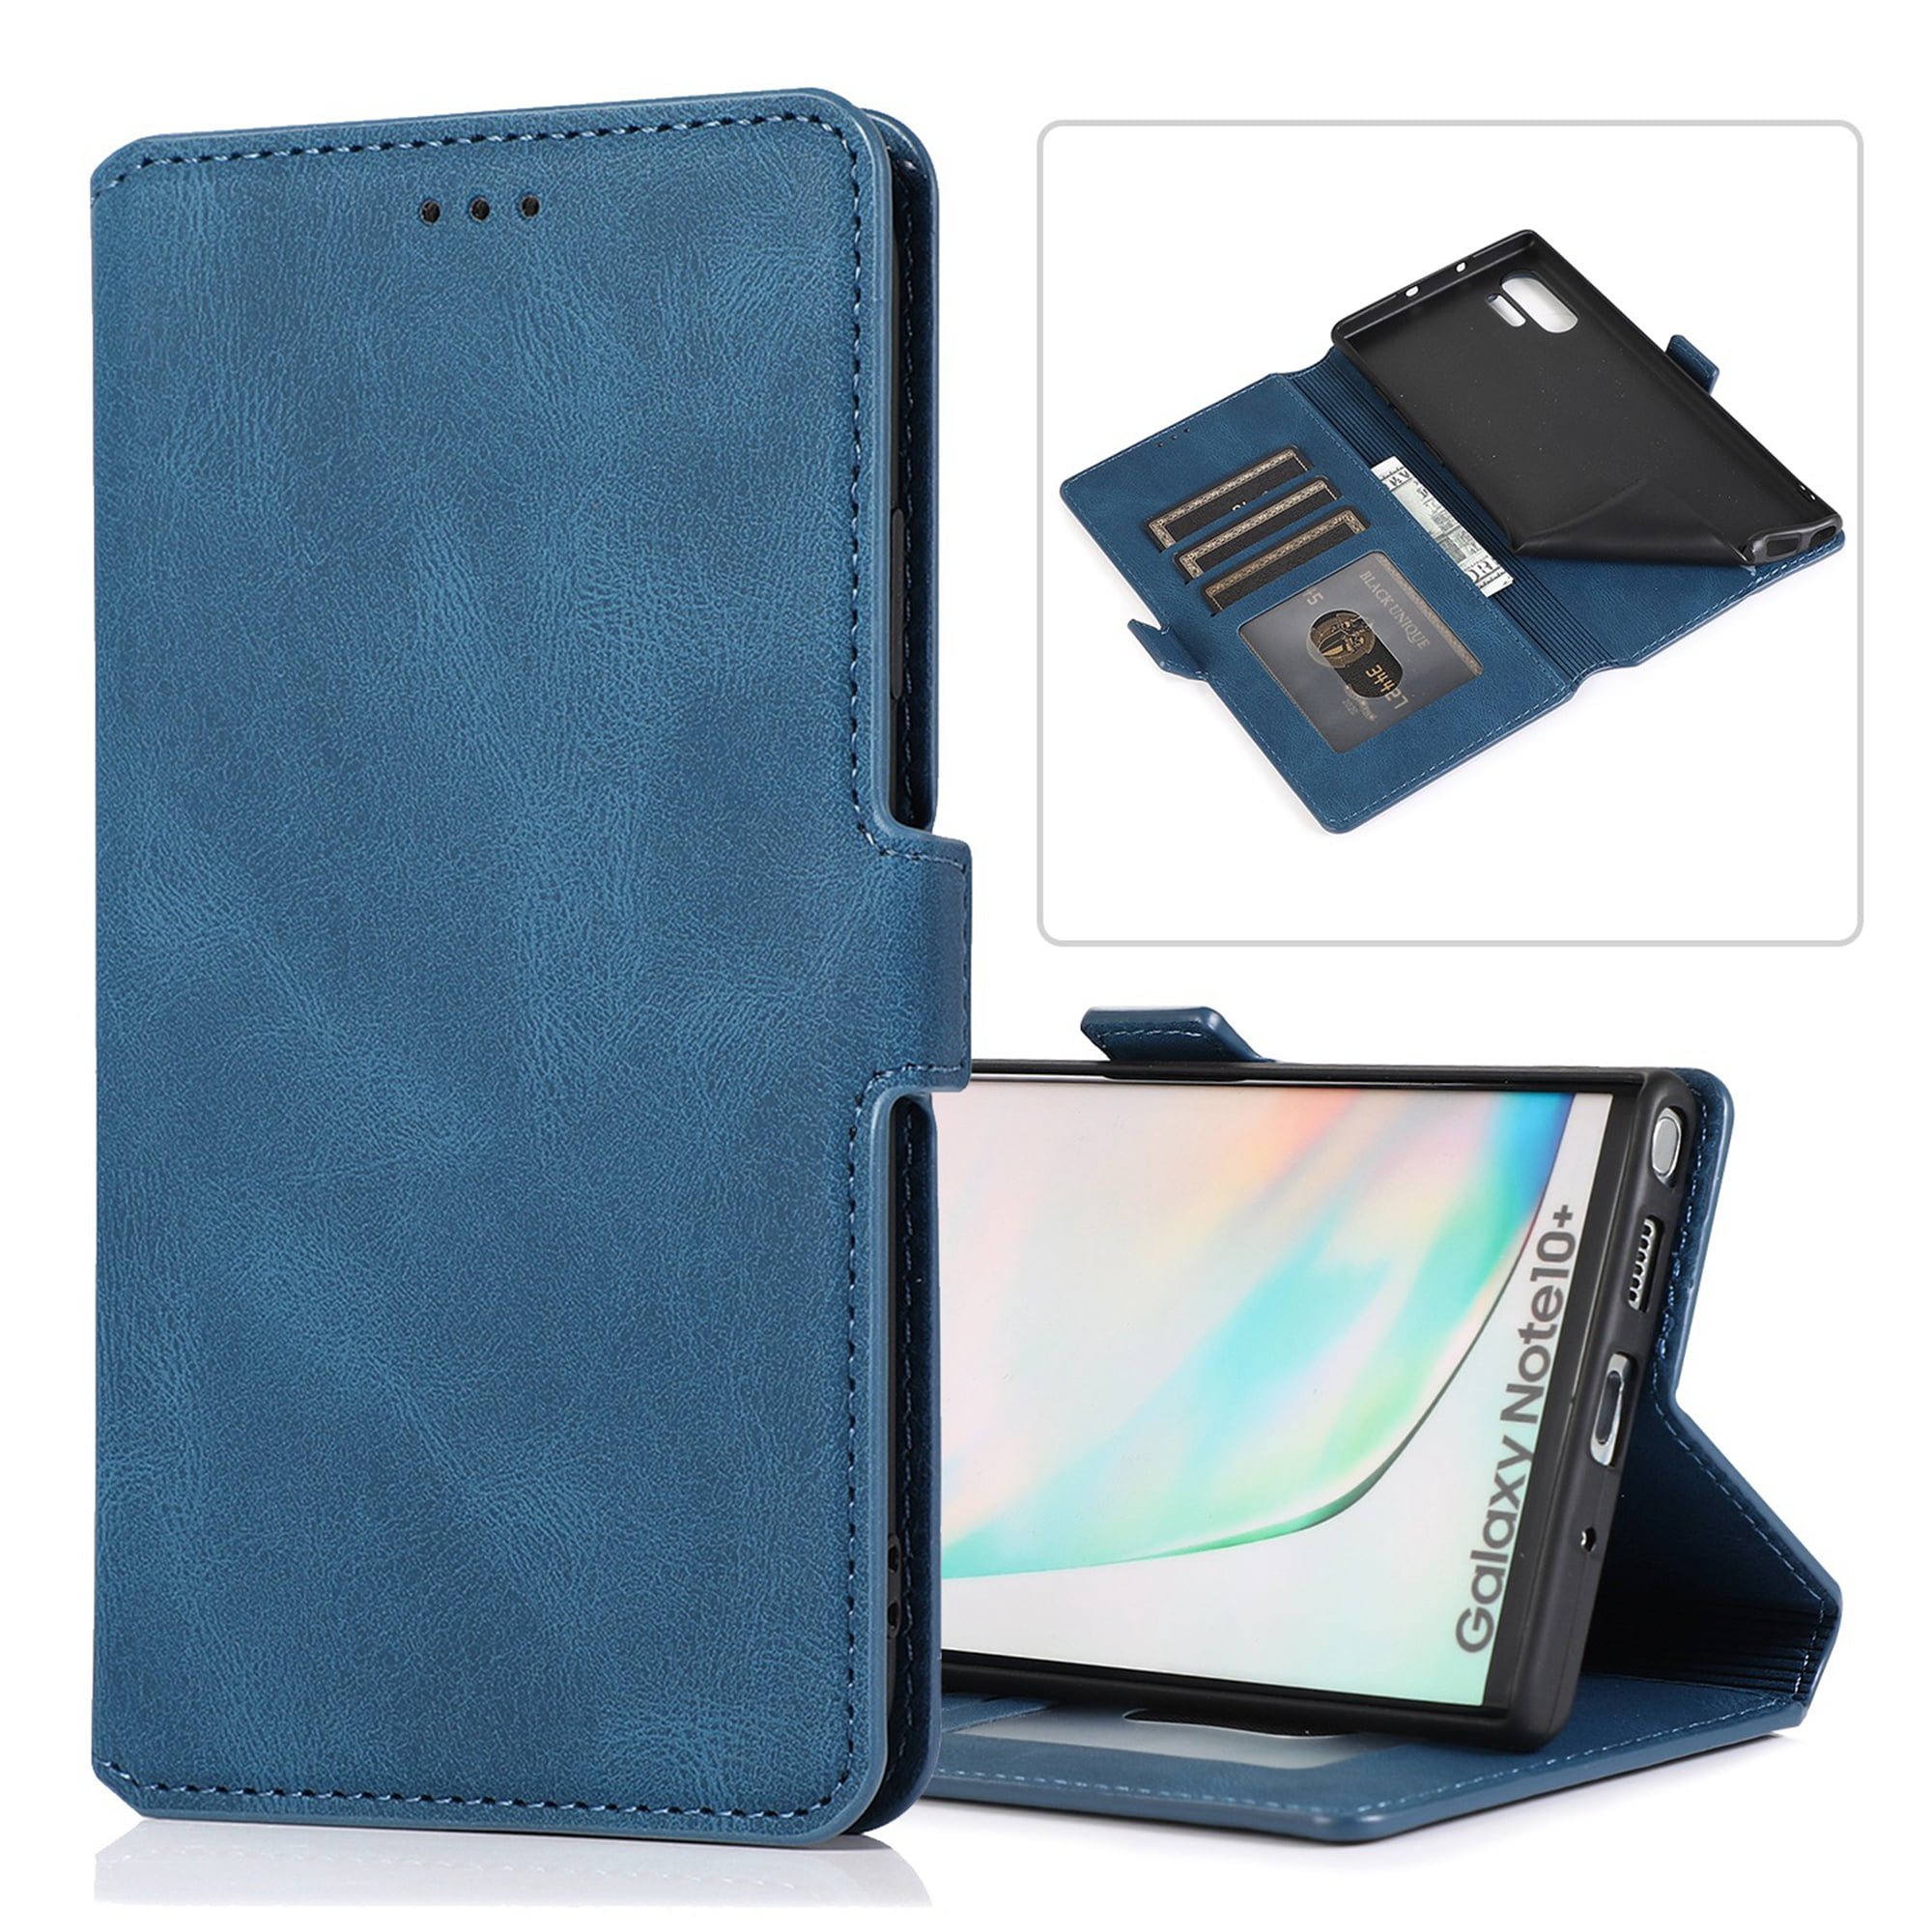 Dteck Case For Samsung Galaxy Note 10 (6.3 inches),Magnetic Retro ...